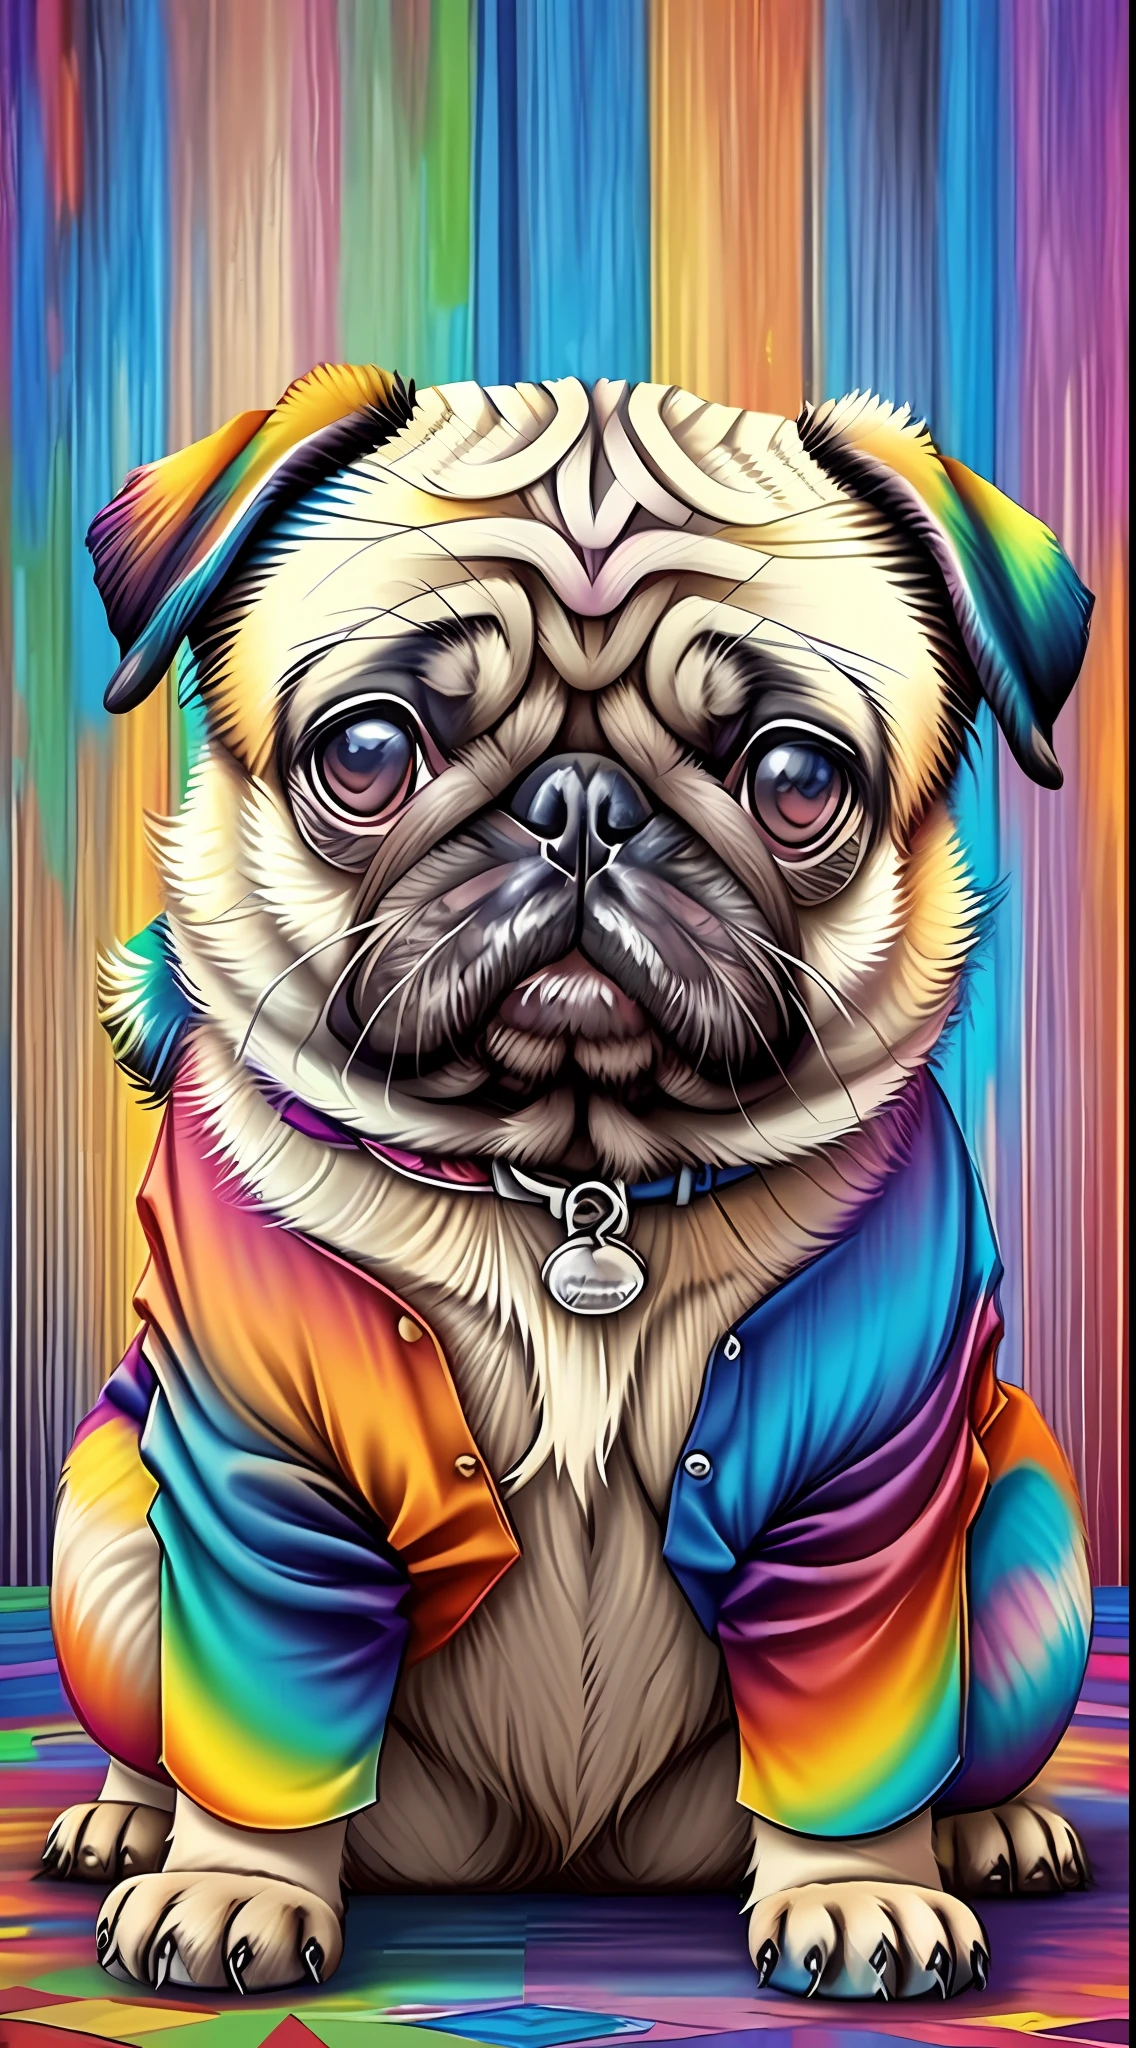 (puppy pug  ),(best pose),(best angle), (better happy expression), Eduardo Kobra quilting ,multidimensional geometric wall PORTRAIT, artistry, chibi,
yang08k, comely, Colouring,
Primary works, top-quality, best qualityer, offcial art, Beautiful and Aesthetic, colorful hair,